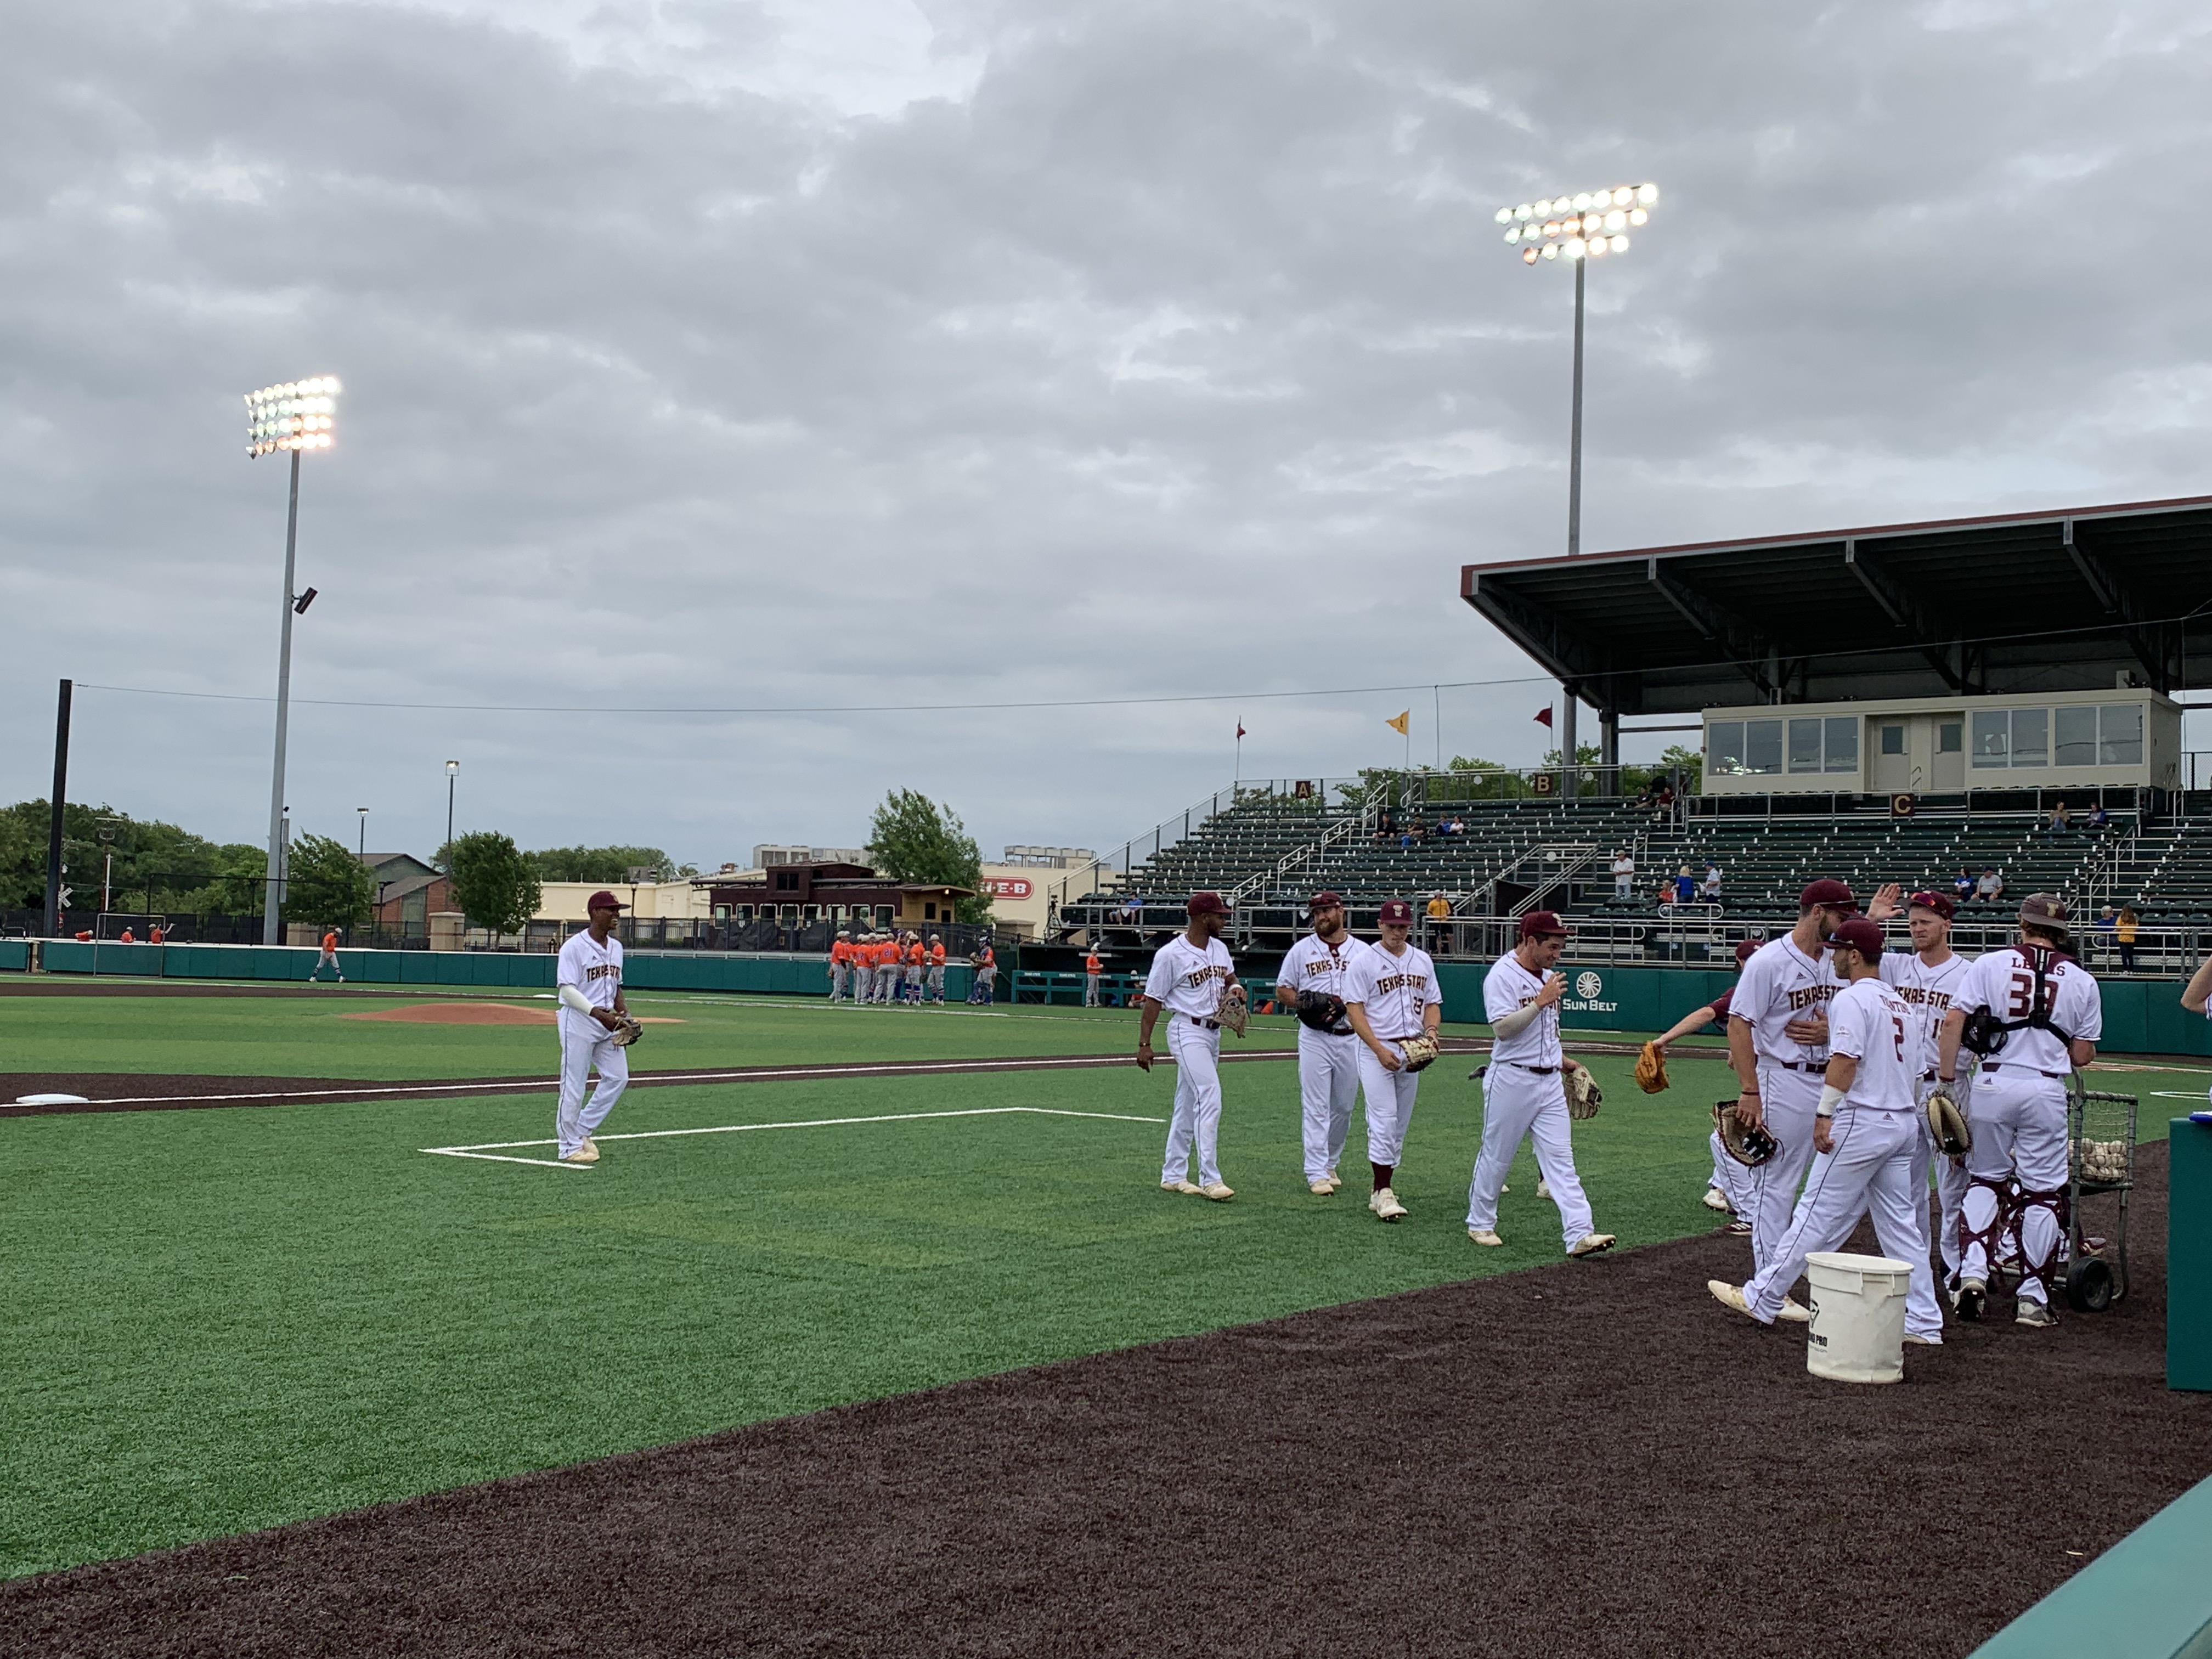 The Texas State baseball team share smiles and high fives in warmups before their matchup with the Houston Baptist Huskies on April 16, 2019.